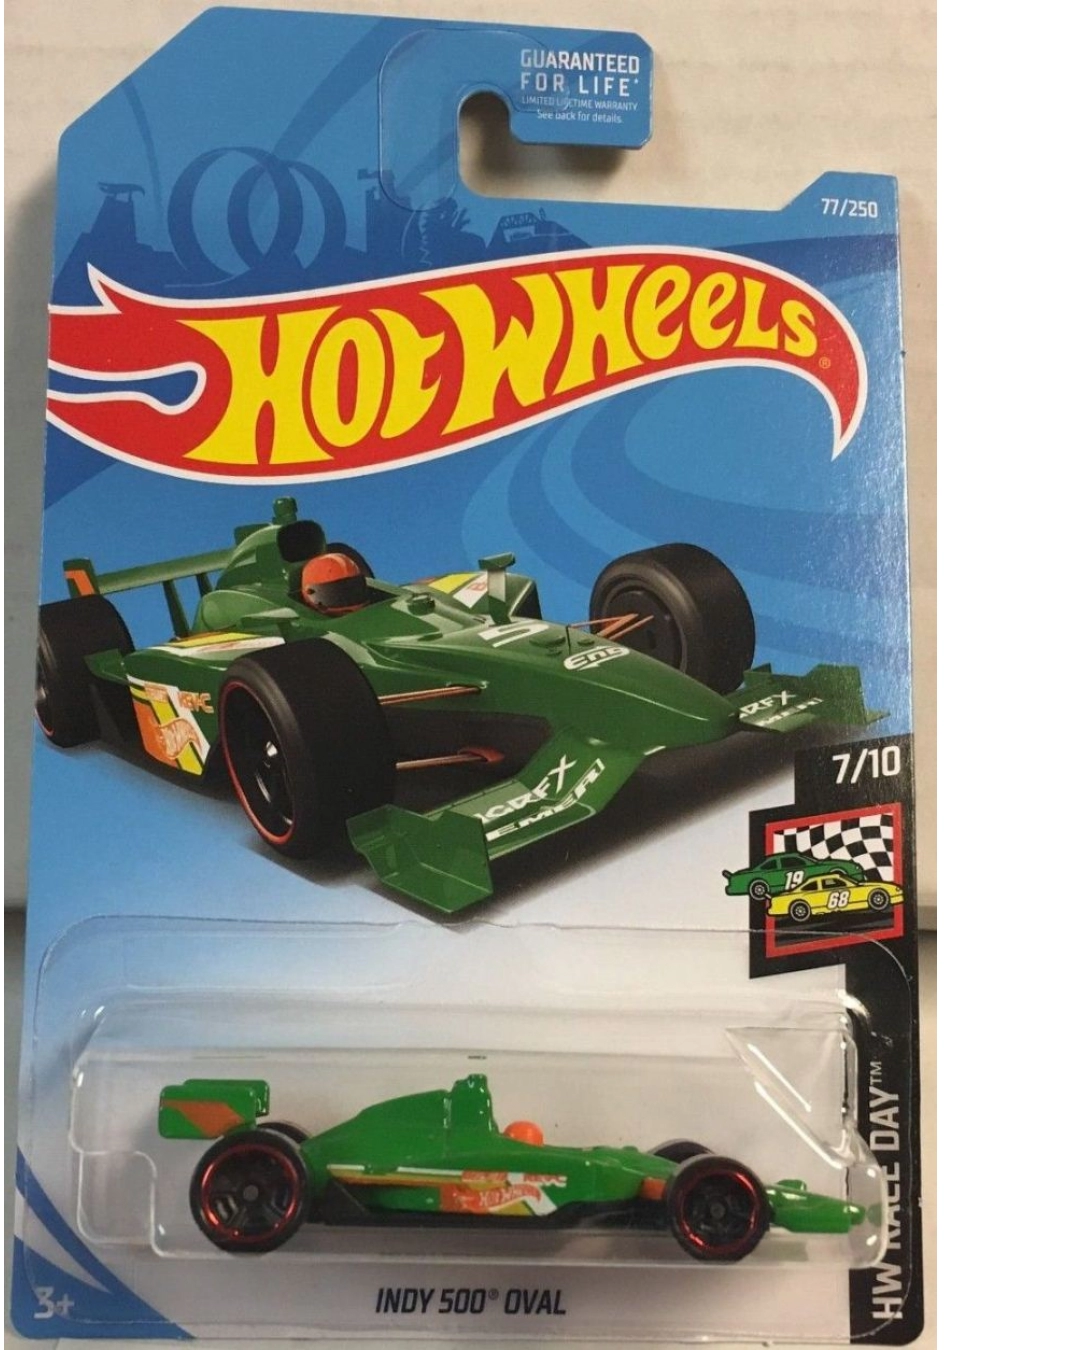 Hot Wheels 2019 Factory Sealed Set HW Race Day 7/10 Indy 500 Oval 